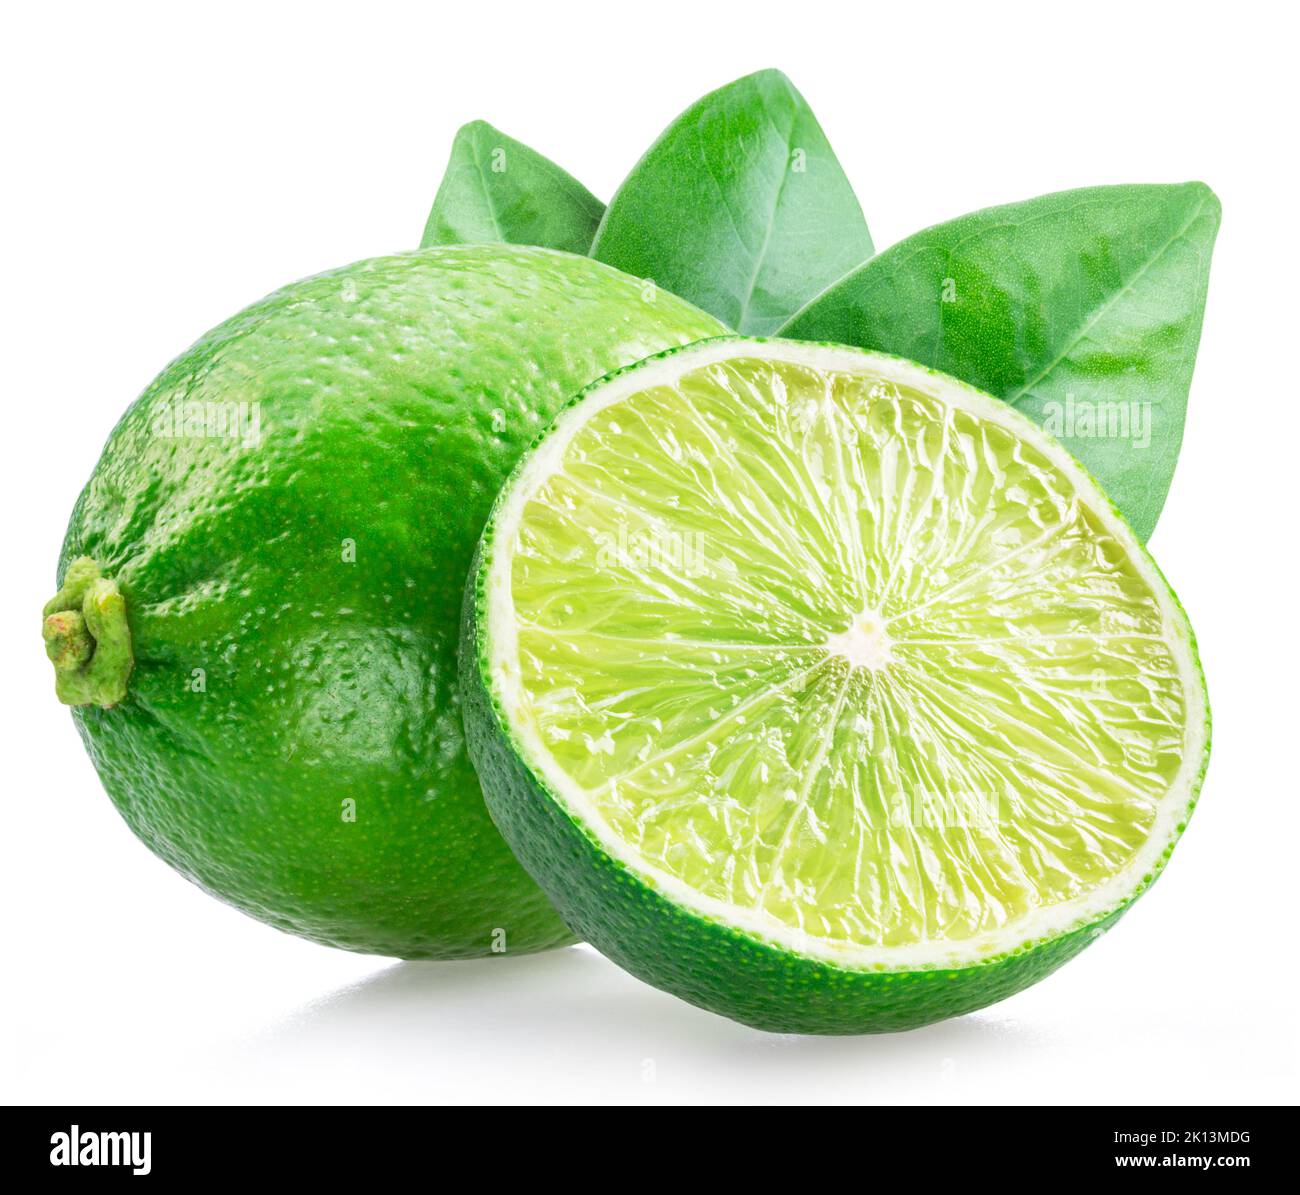 Lime fruit and lime slice with mint leaves isolated on white background. Stock Photo